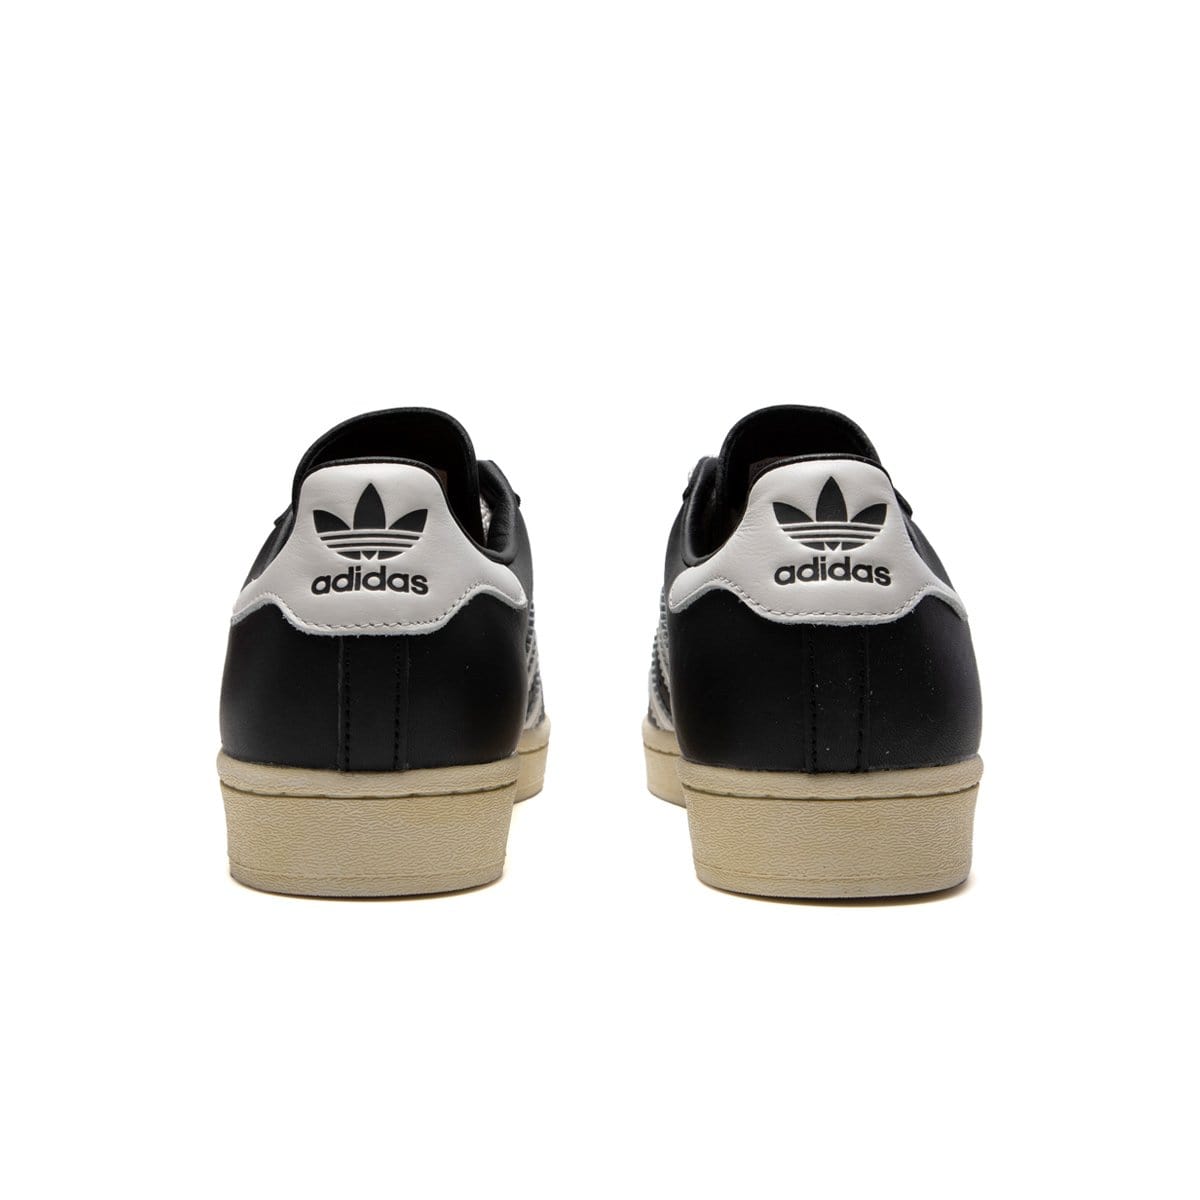 adidas shoes lowest price online